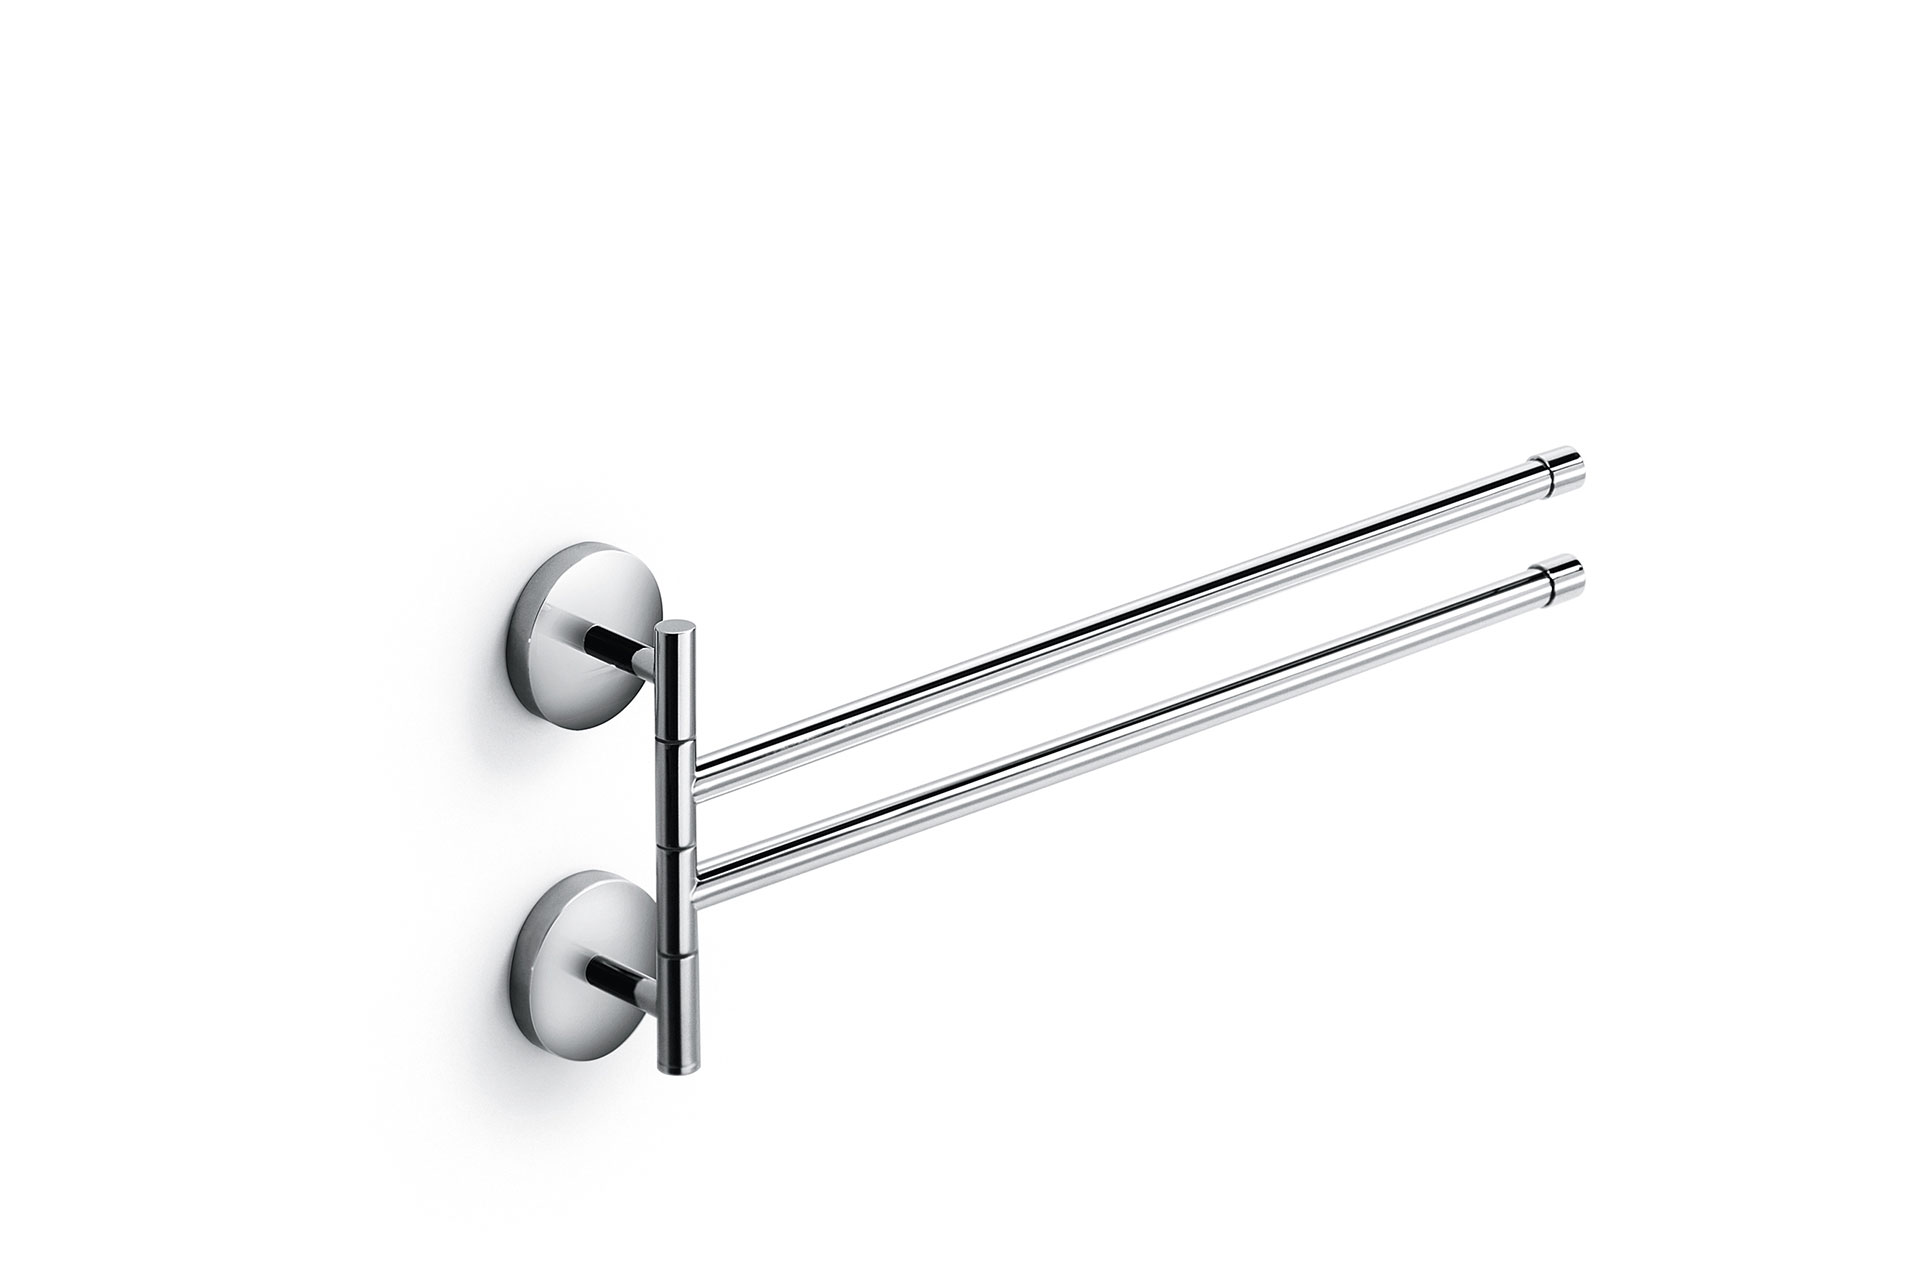 Double jointed towel rail